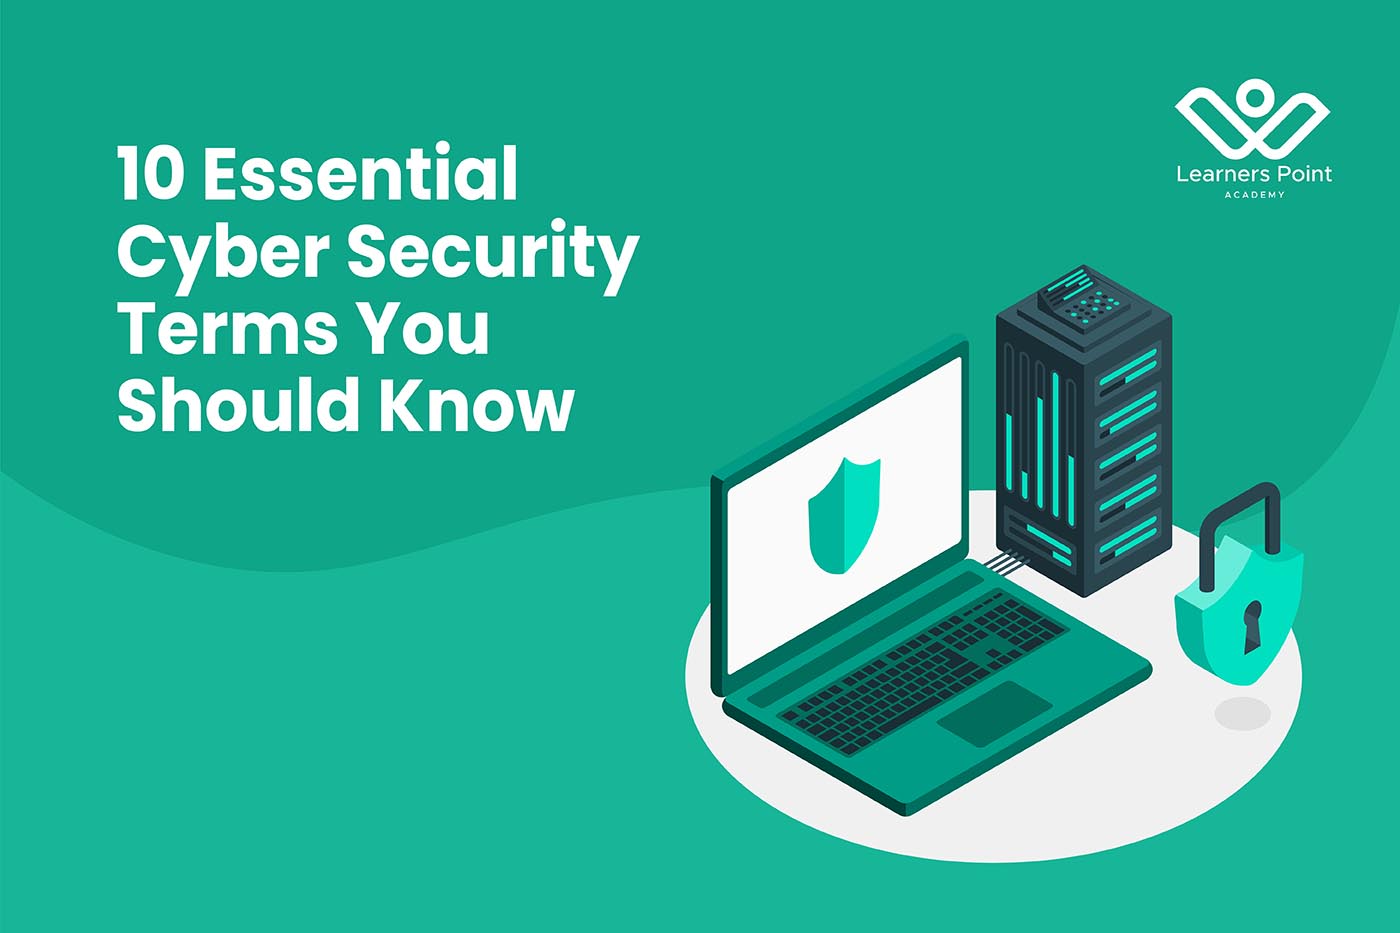 10 Essential Cyber Security Terms You Should Know